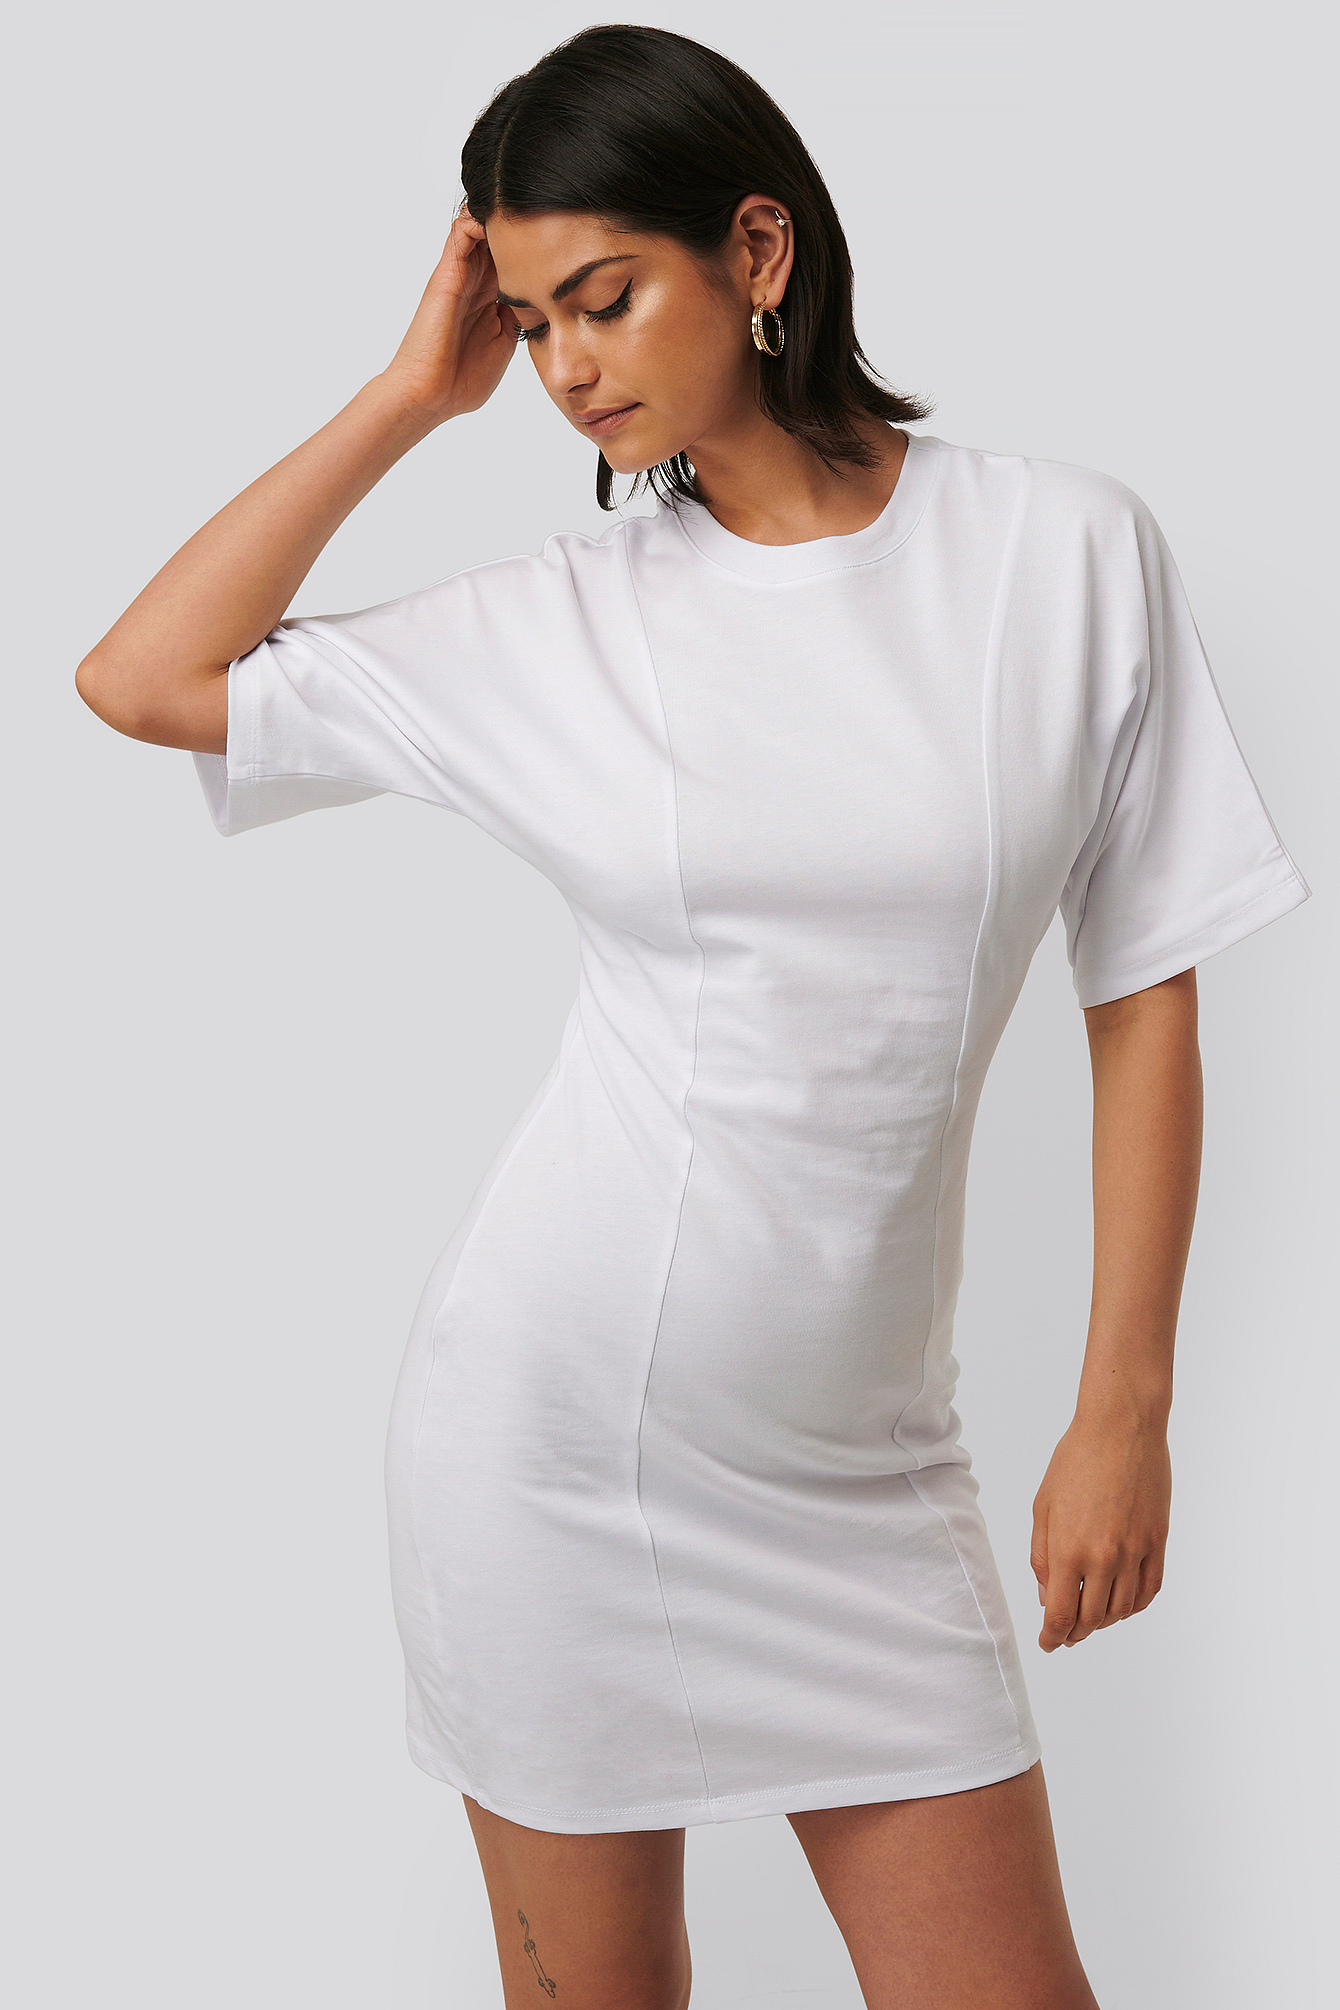 fitted white t shirt dress